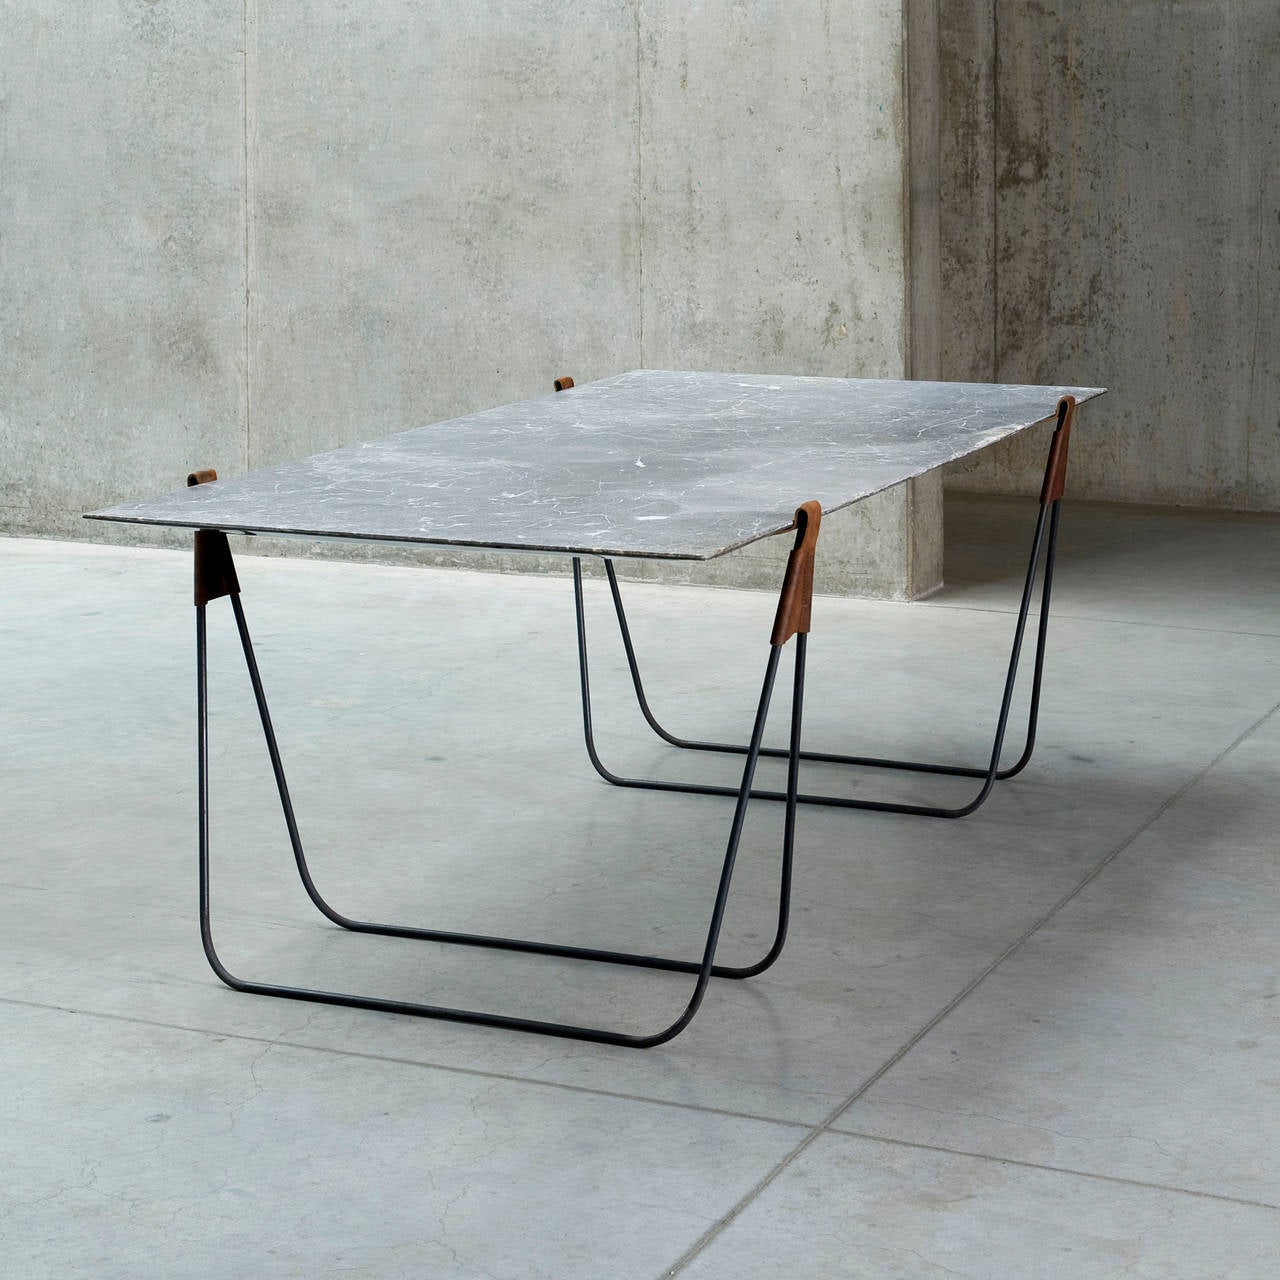 InVein is a marble trestle table with a plus. Once you turn the table top around, it doubles as a mirror and decorative object. The classic trestle table represents simplicity, mobility and efficiency. These qualities go against every single thing